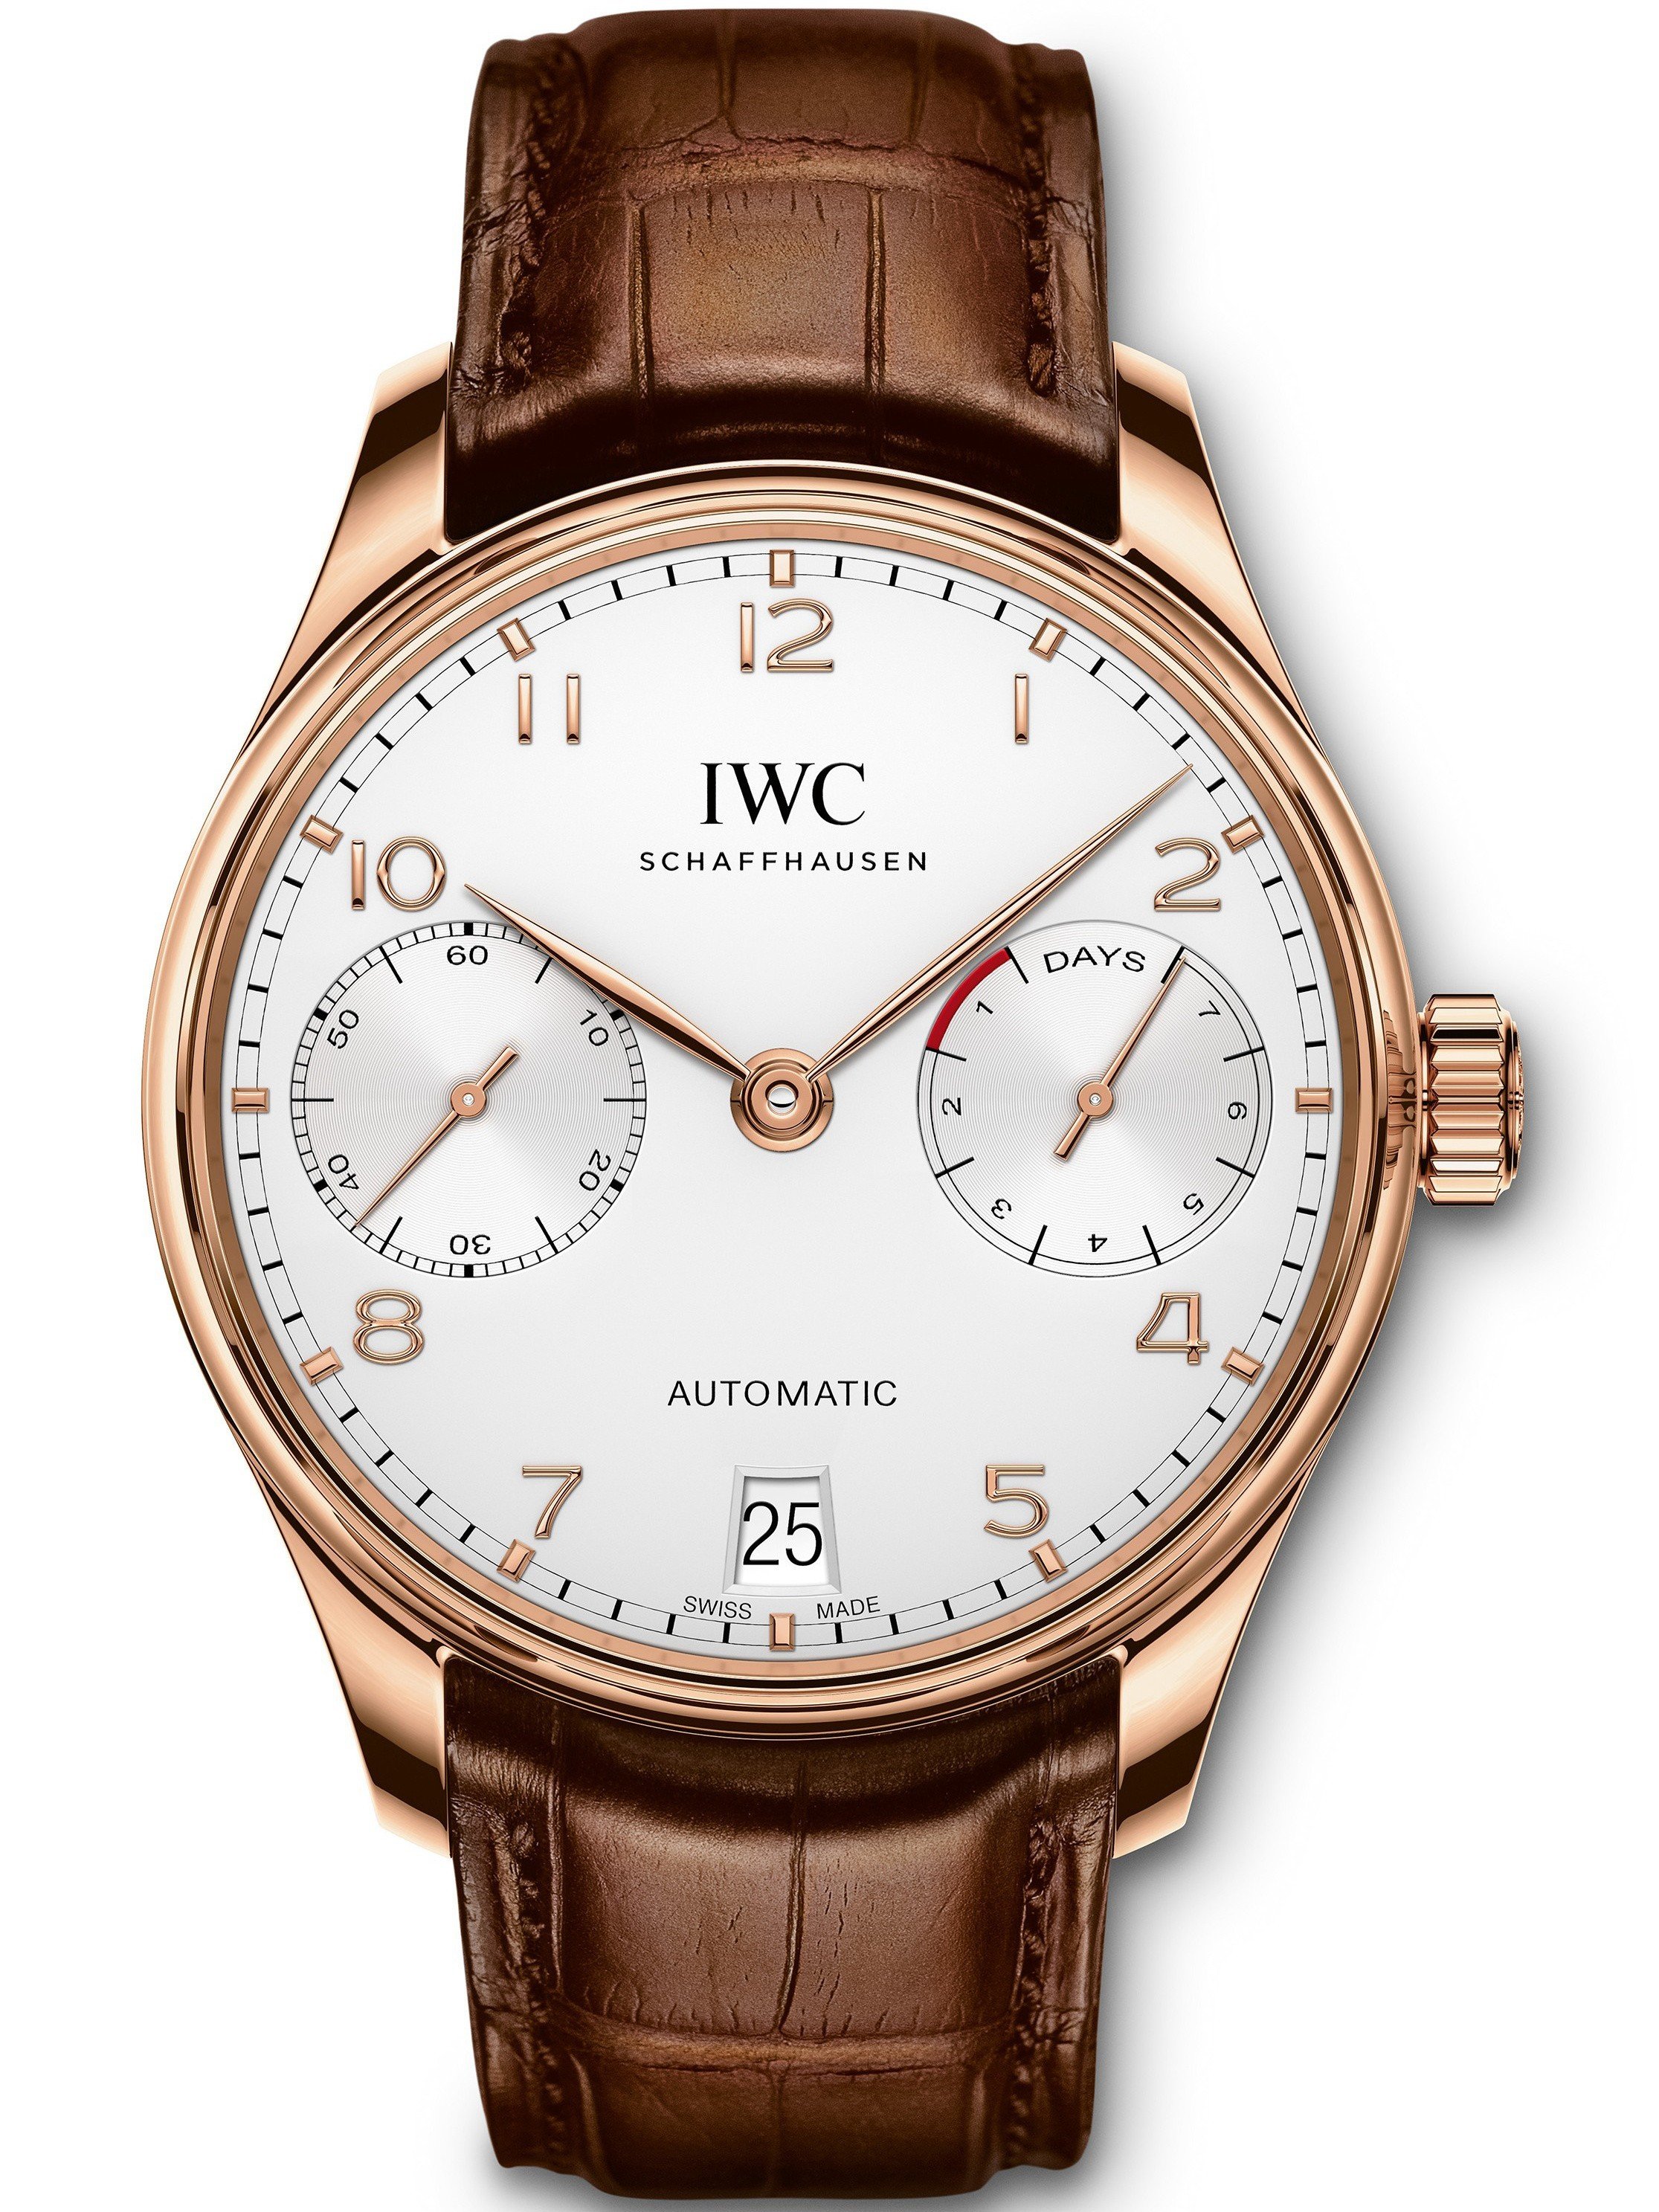 AAA Replica IWC Portugieser Automatic 7 Day Power Reserve Mens Watch IW500701